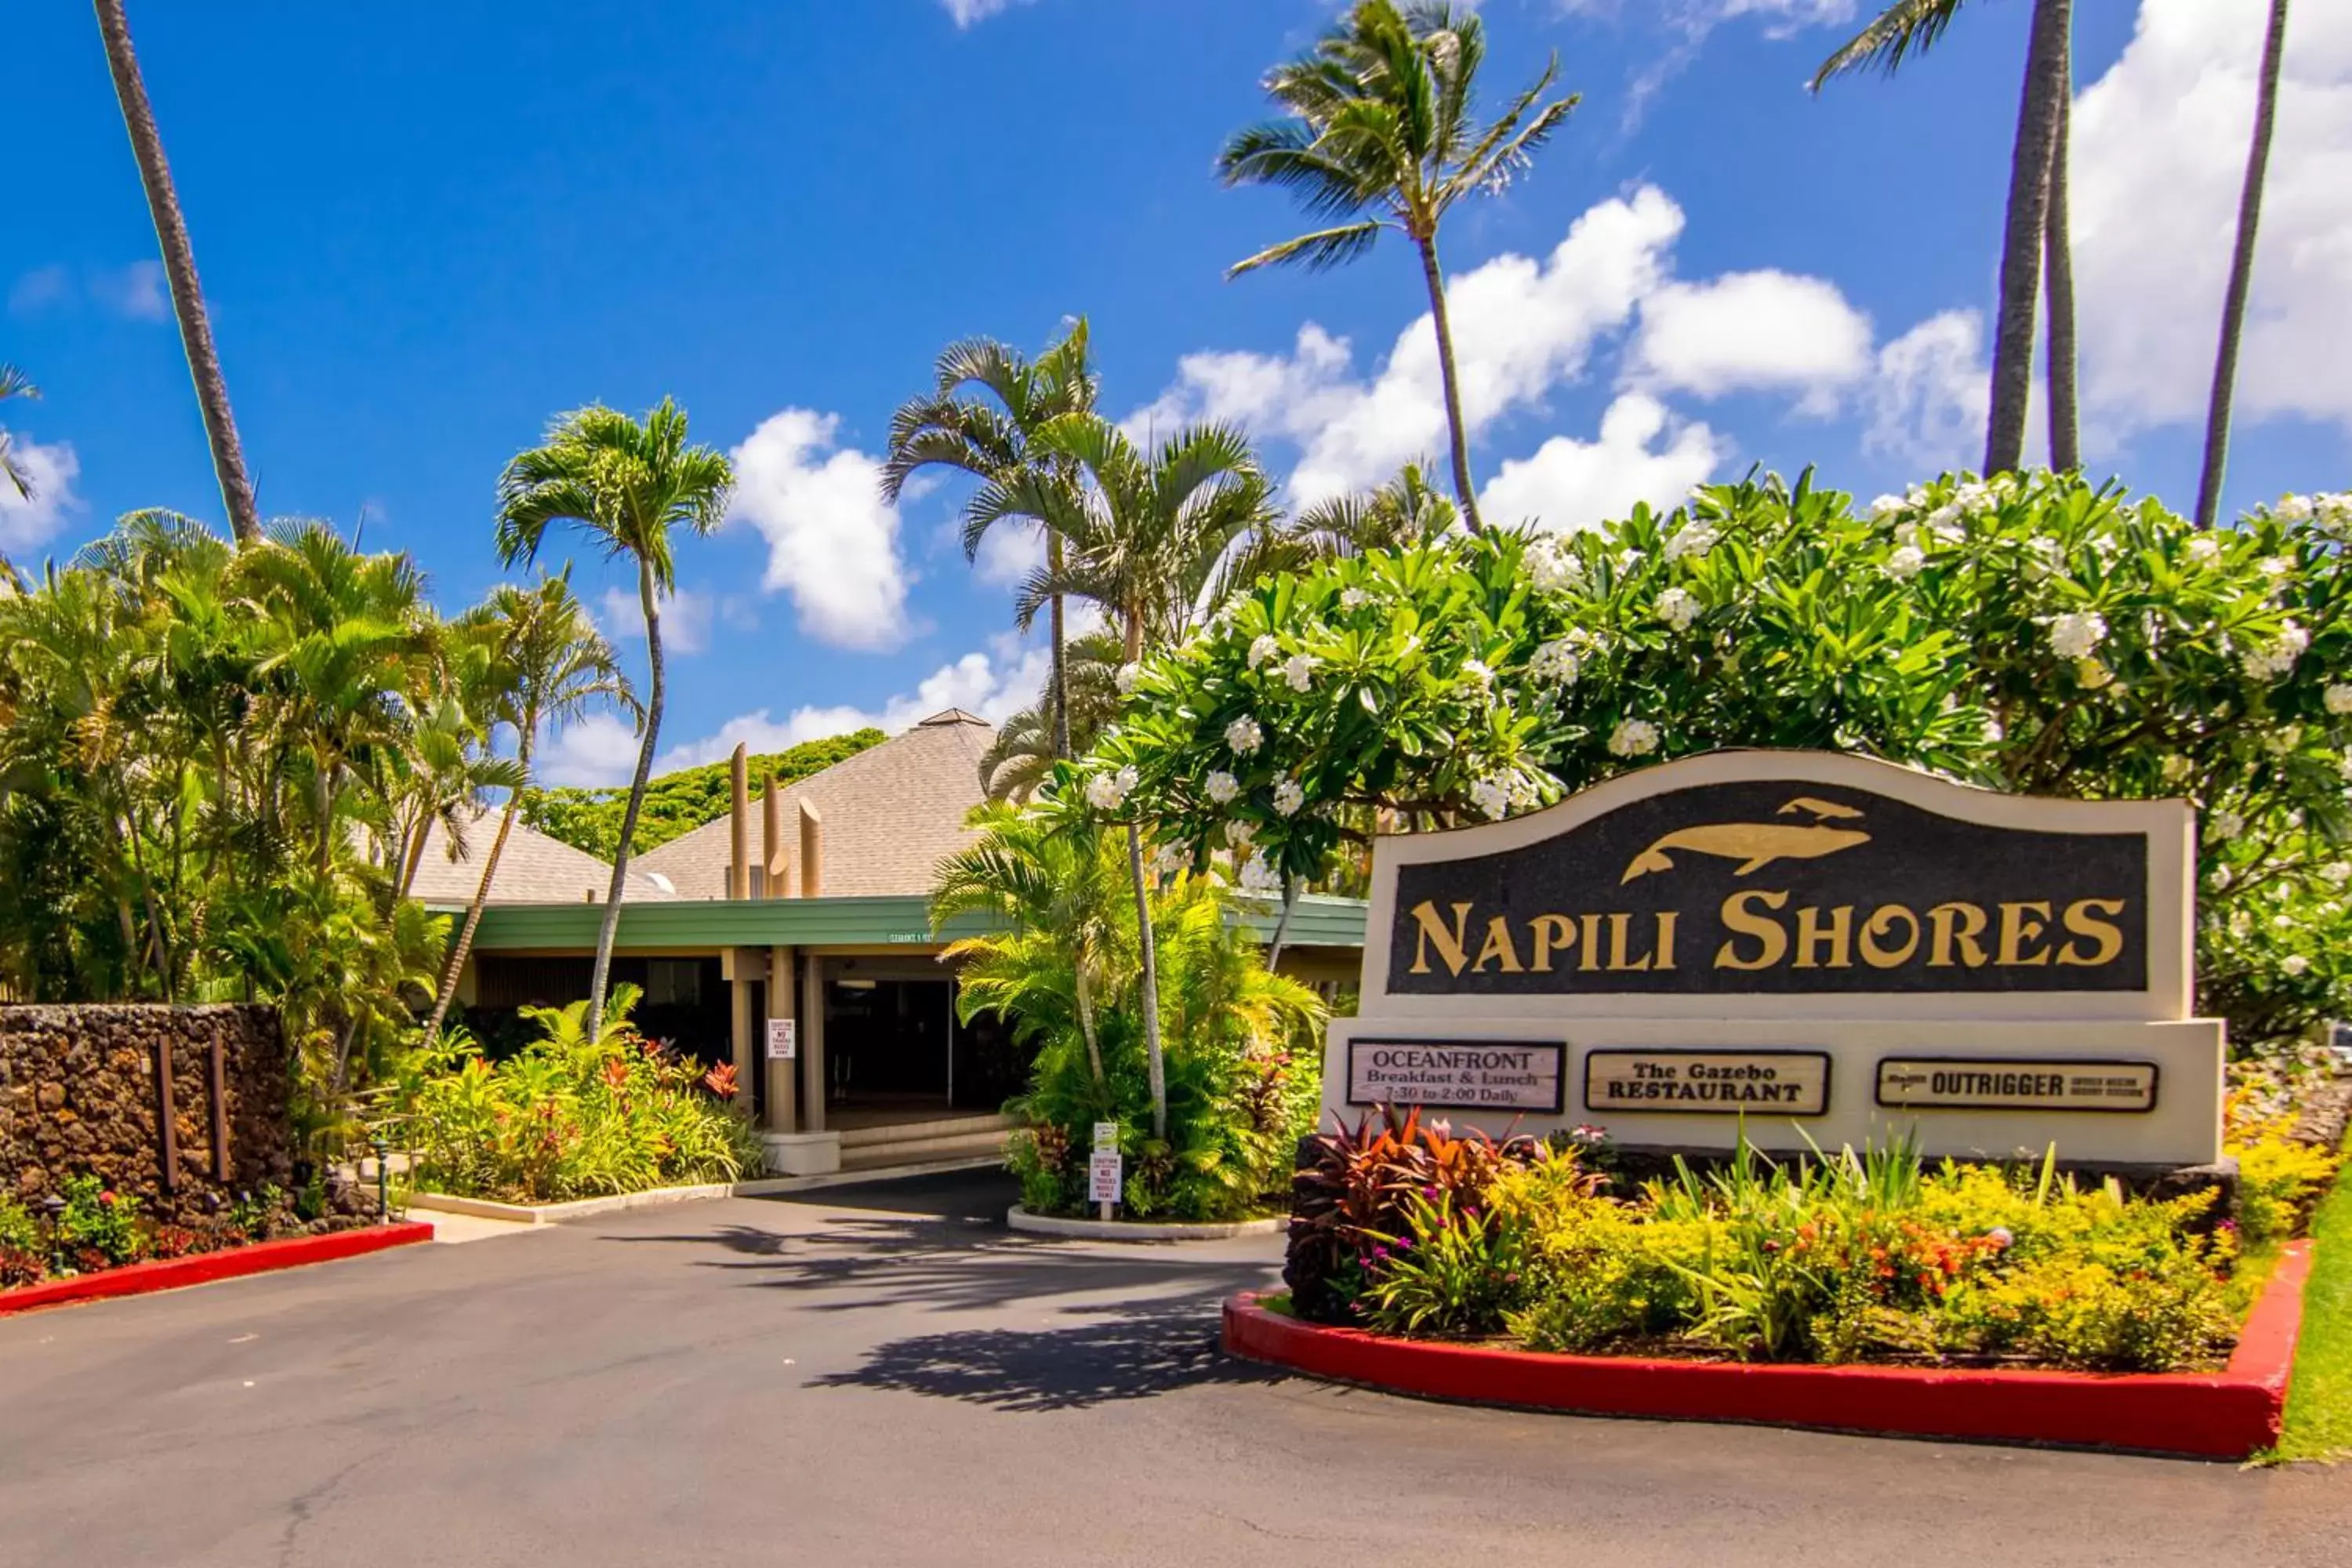 Property Building in Napili Shores Maui by OUTRIGGER - No Resort & Housekeeping Fees